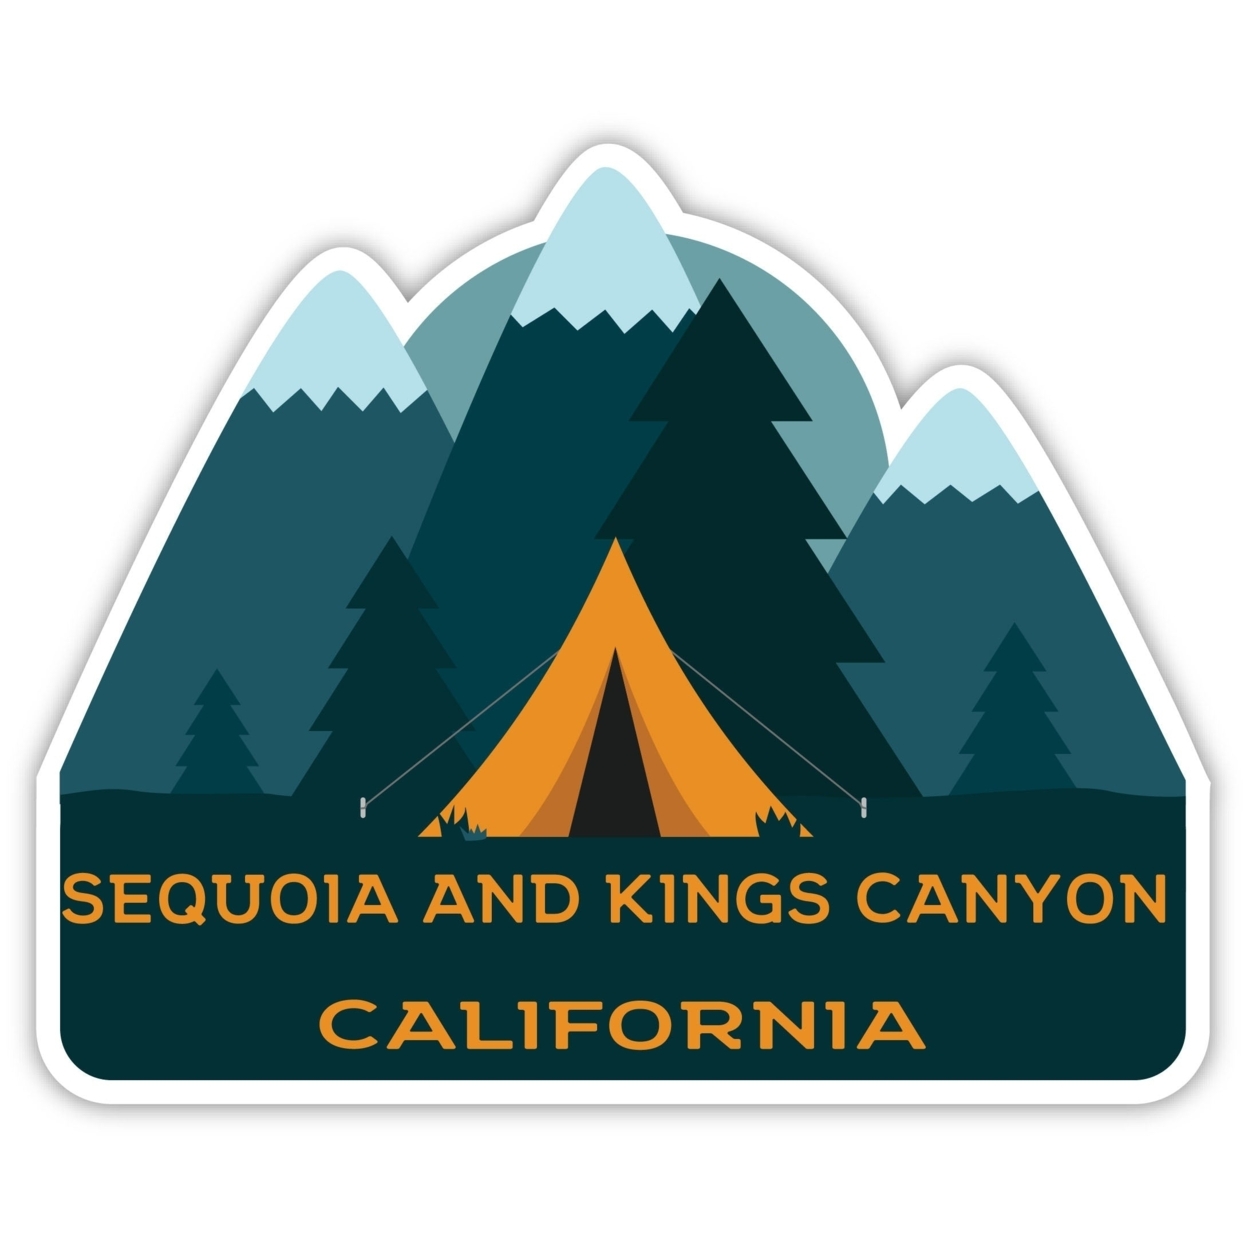 Sequoia And Kings Canyon California Souvenir Decorative Stickers (Choose Theme And Size) - Single Unit, 2-Inch, Tent